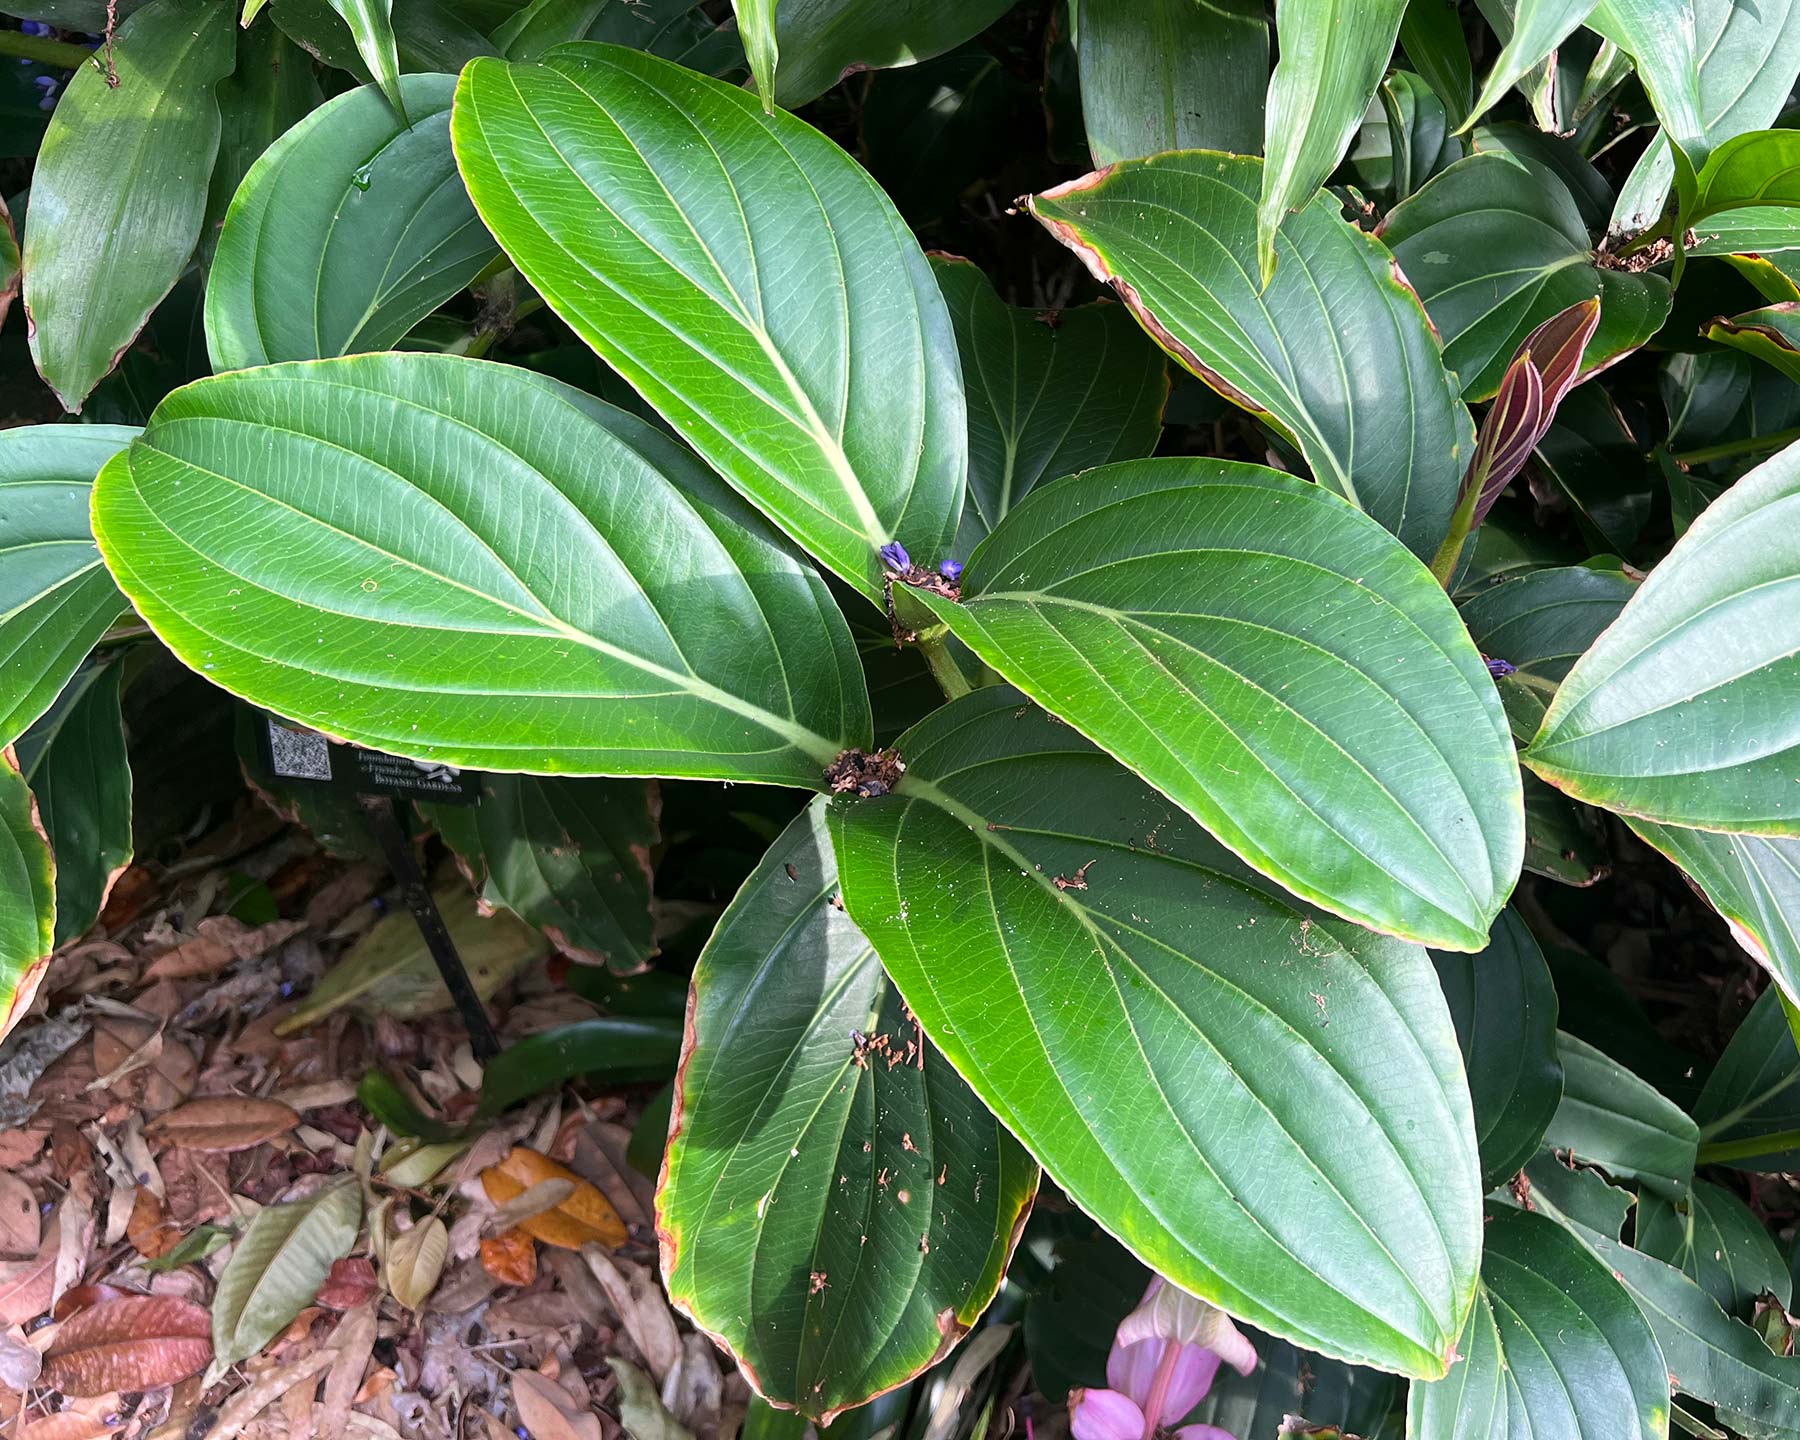 Medinilla magnifica large deep leaves with with promenent viens